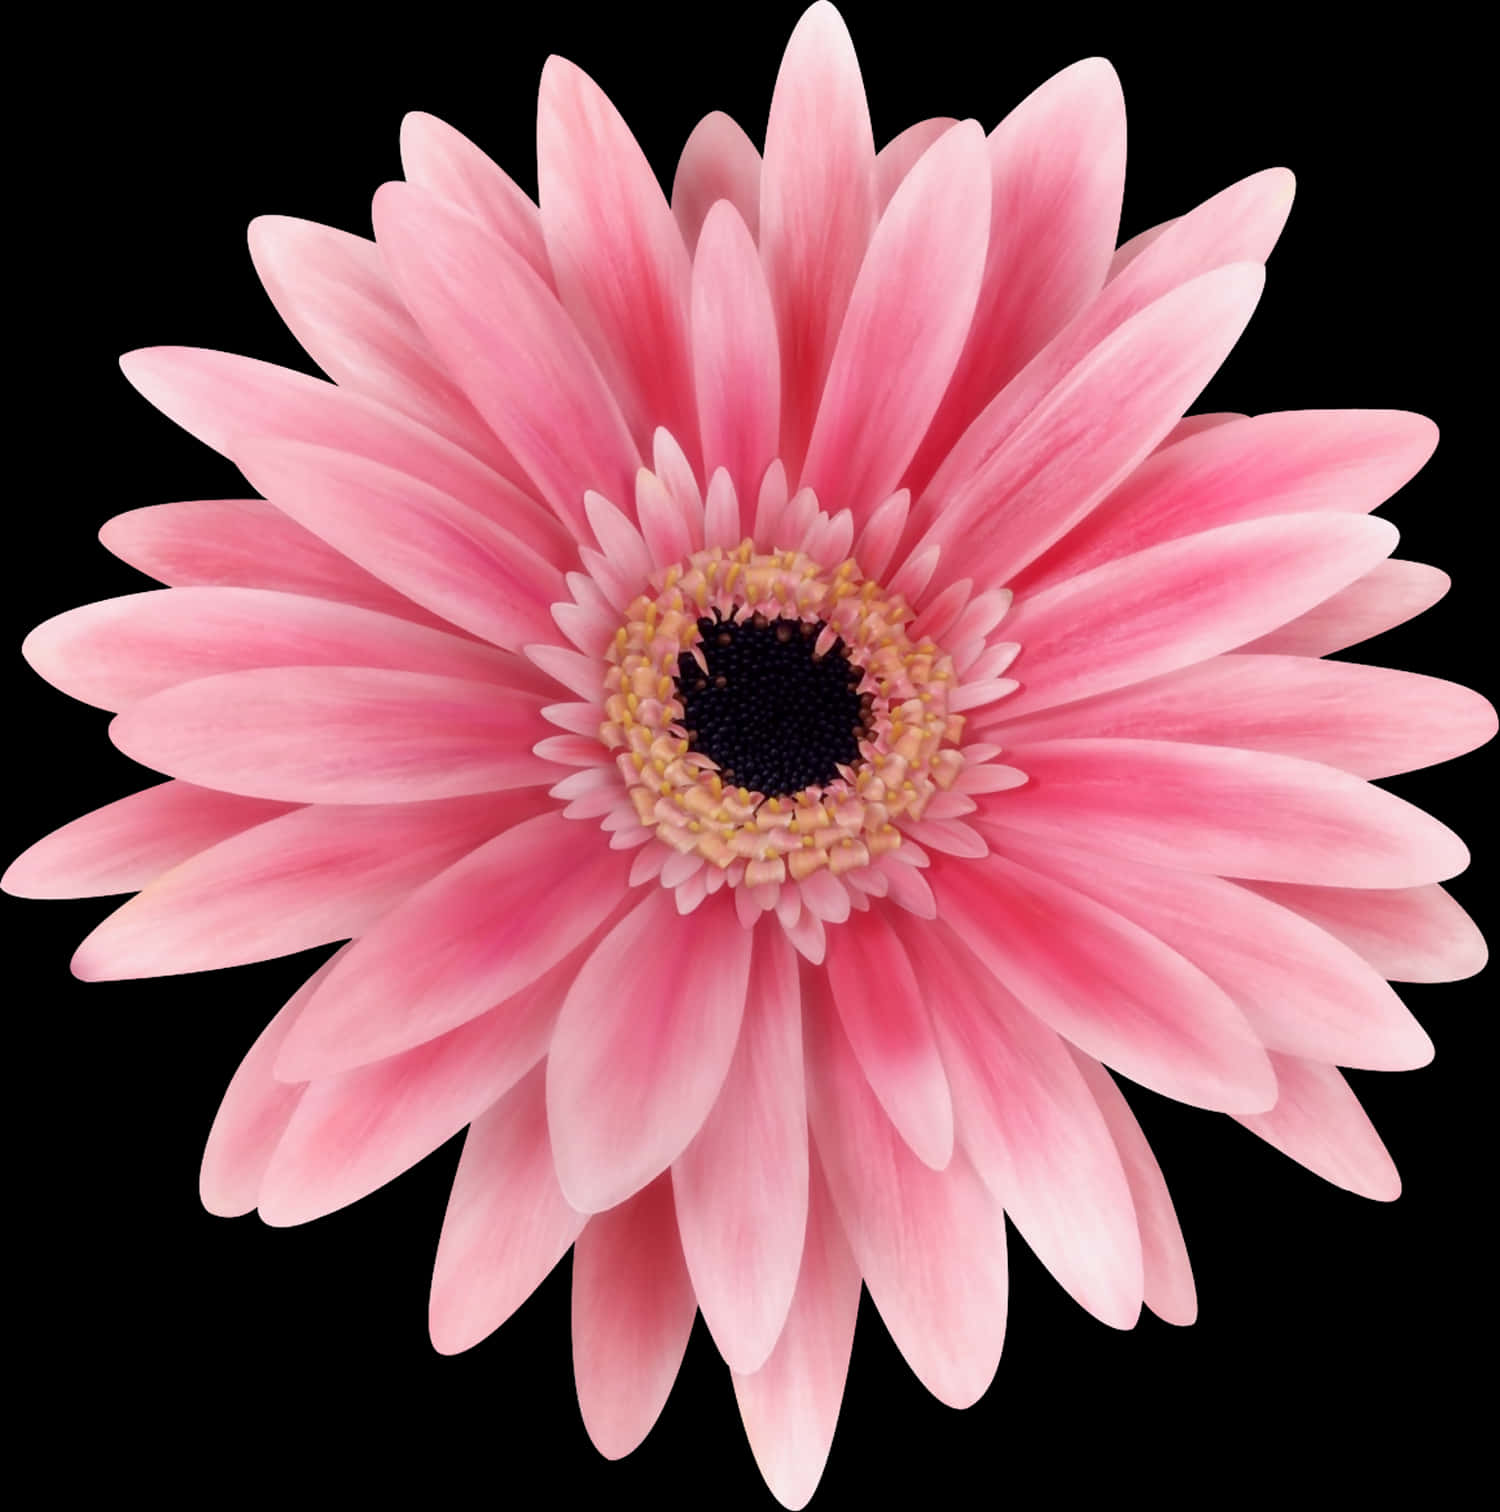 A Pink Flower With A Black Center